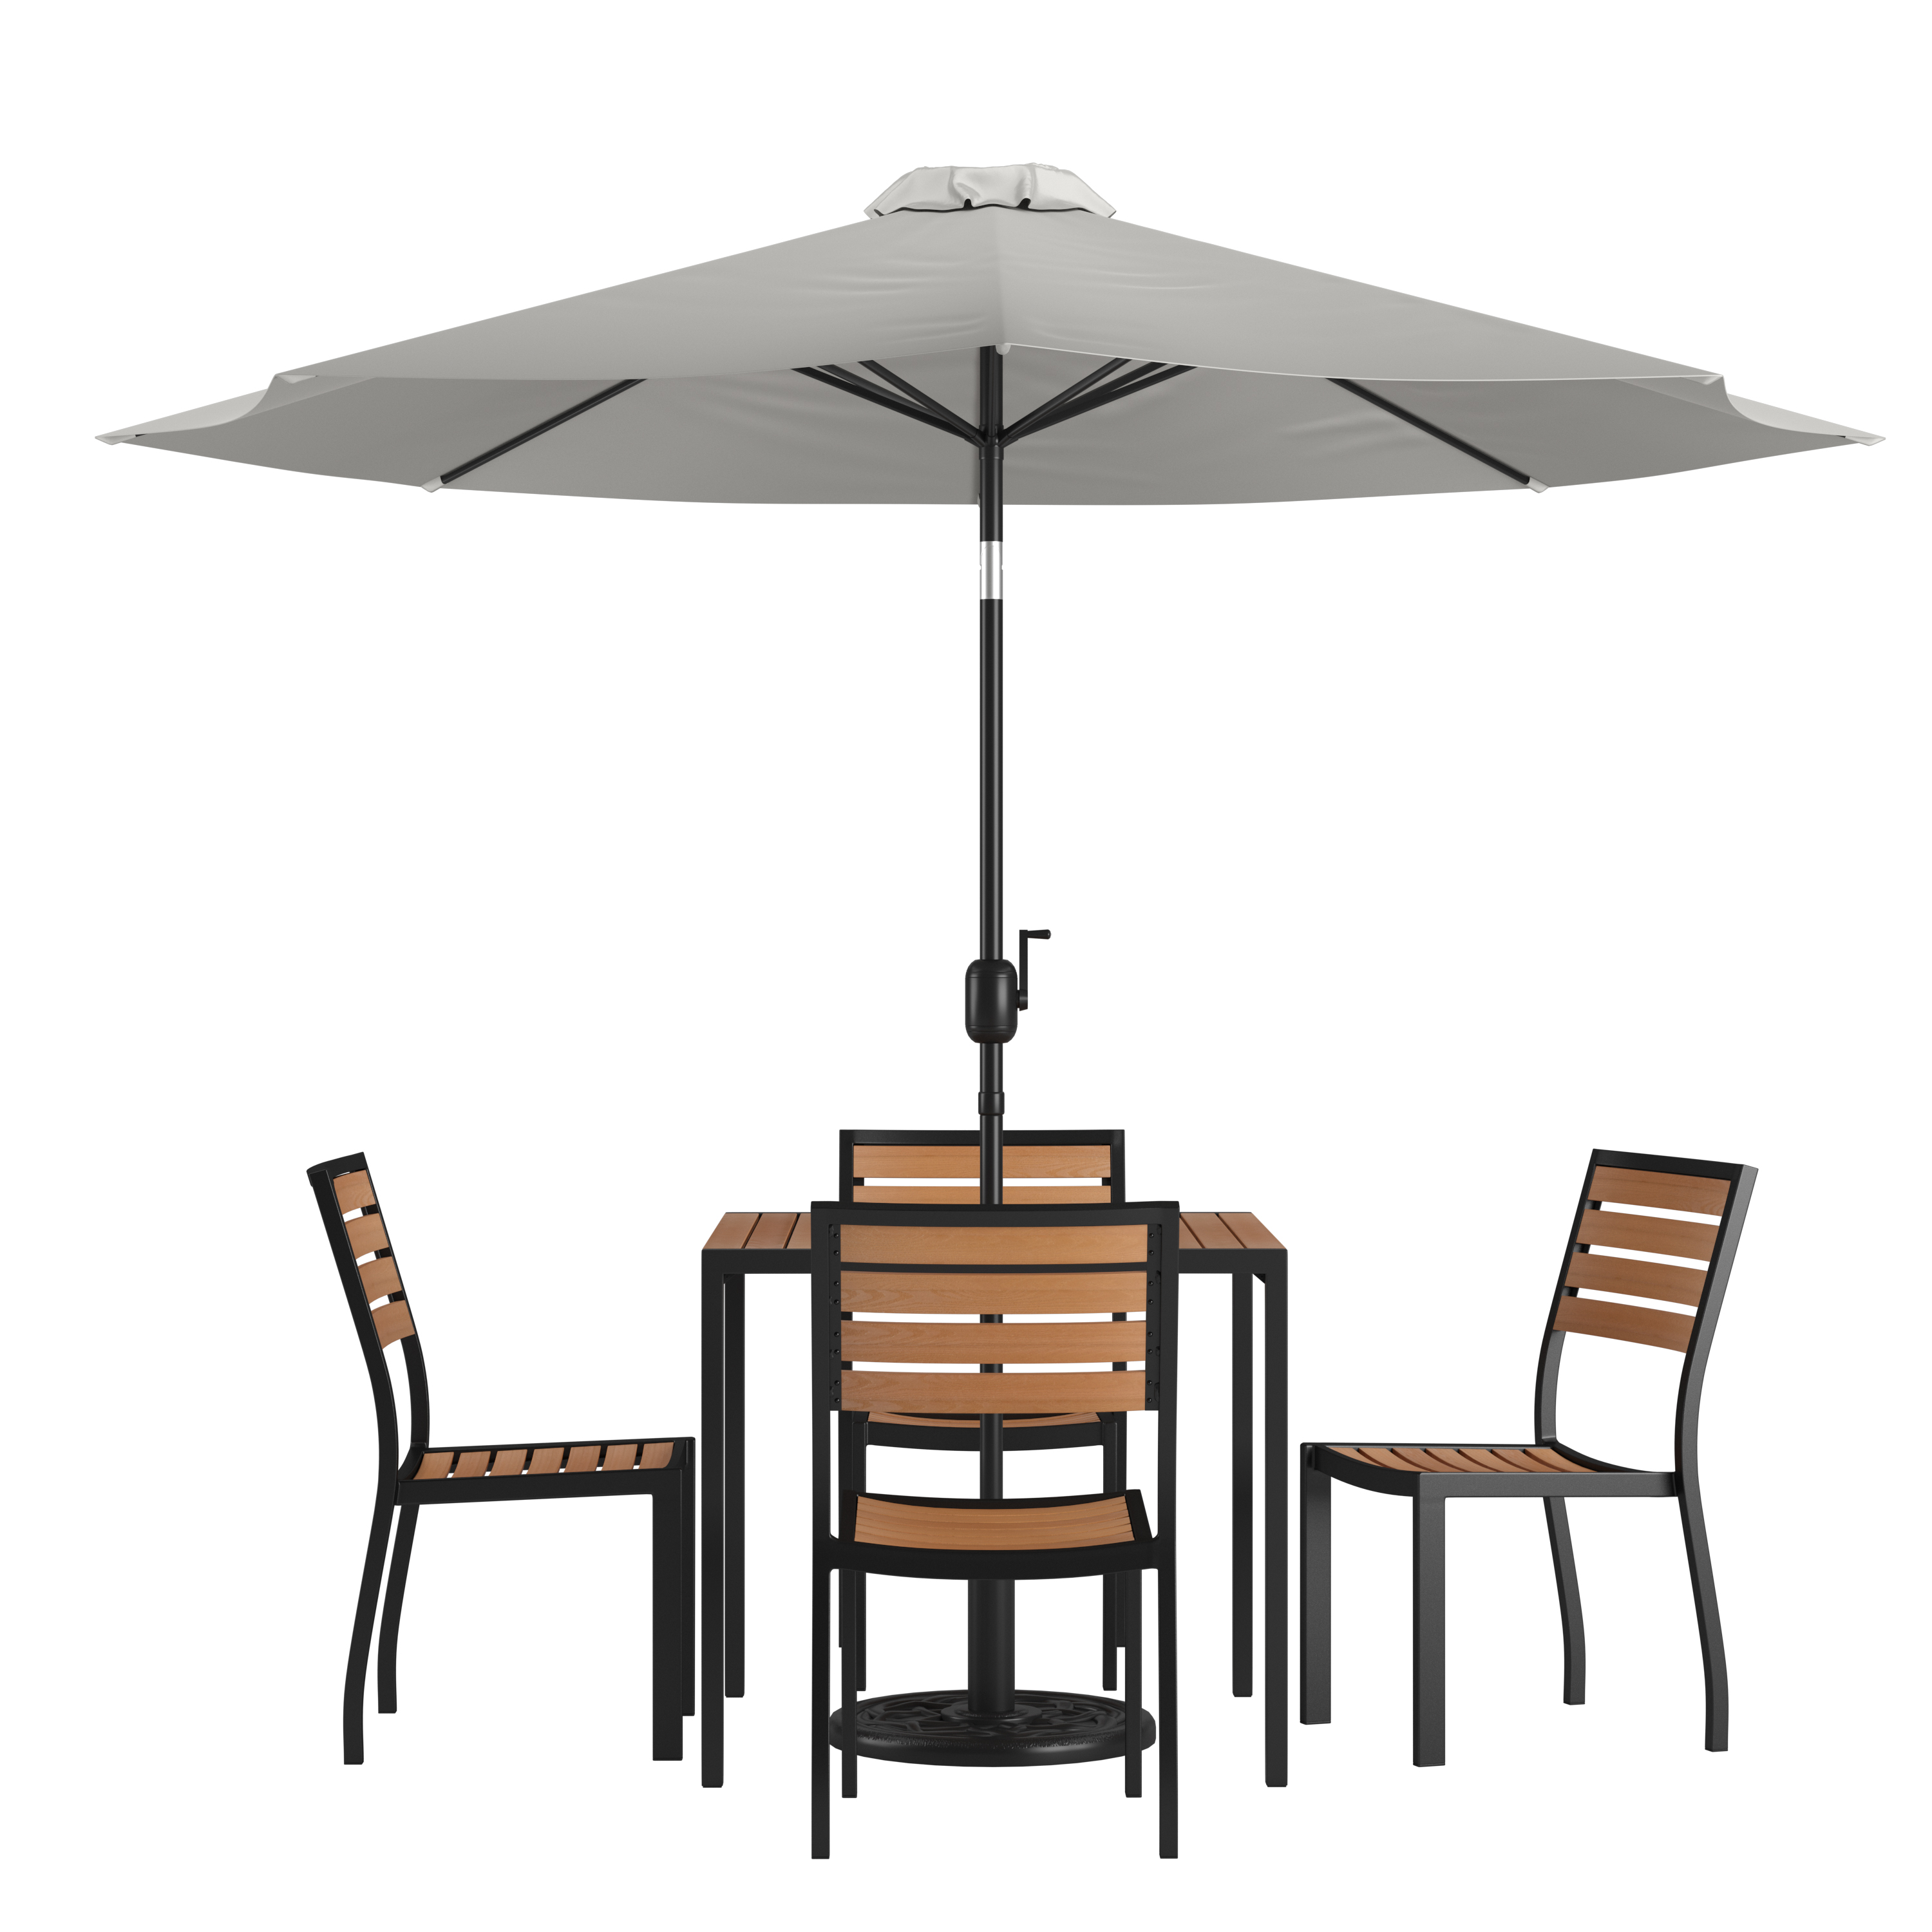 Merrick Lane Seven Piece Faux Teak Patio Dining Set - 35" Square Table, 4 Armless Stacking Club Chairs and 9' Gray Patio Umbrella & Base - image 2 of 18